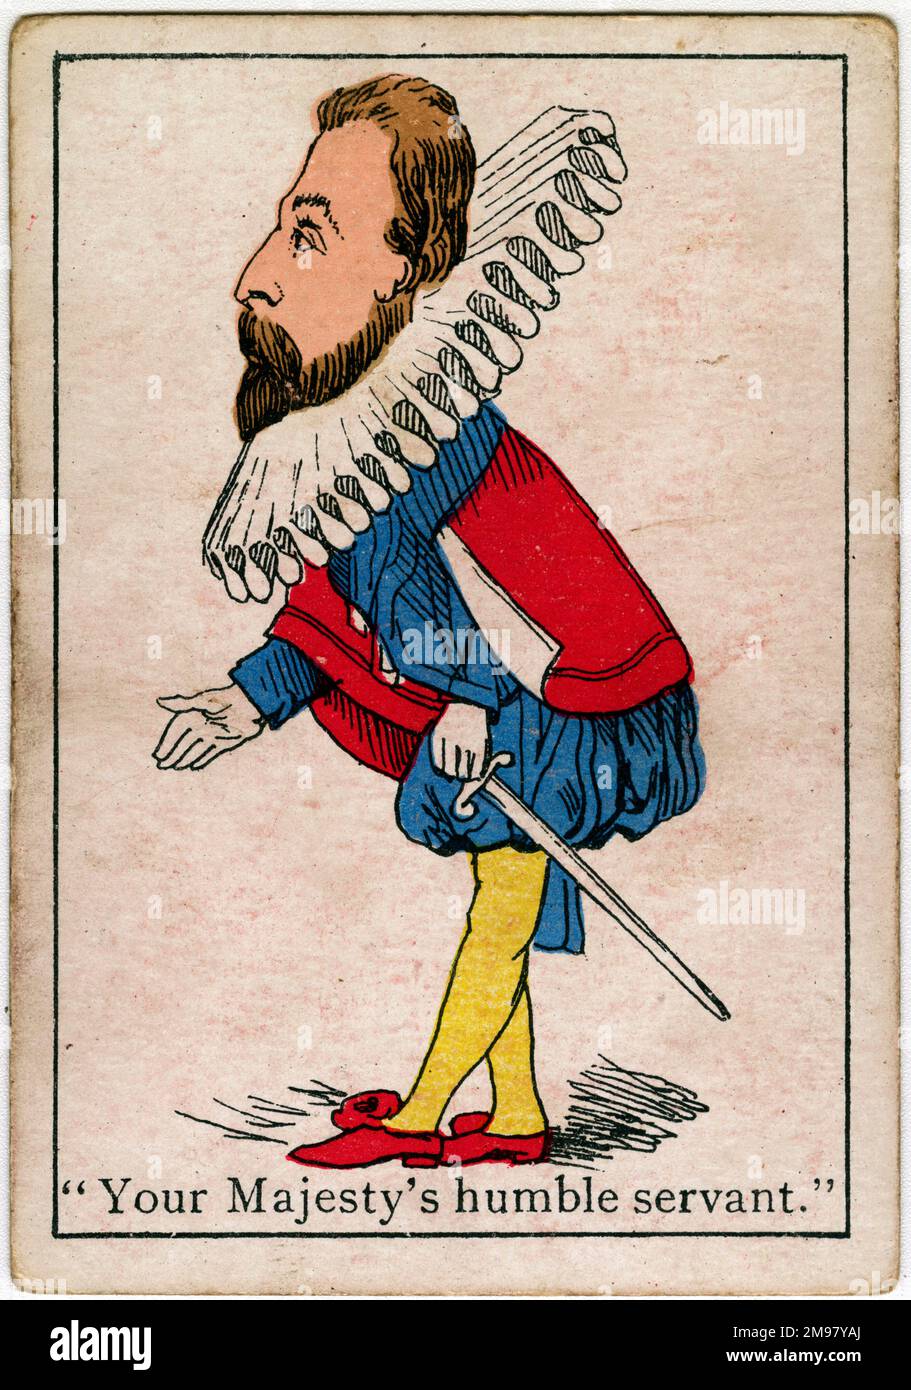 Snap Playing Card - Courtier bowing. Stock Photo